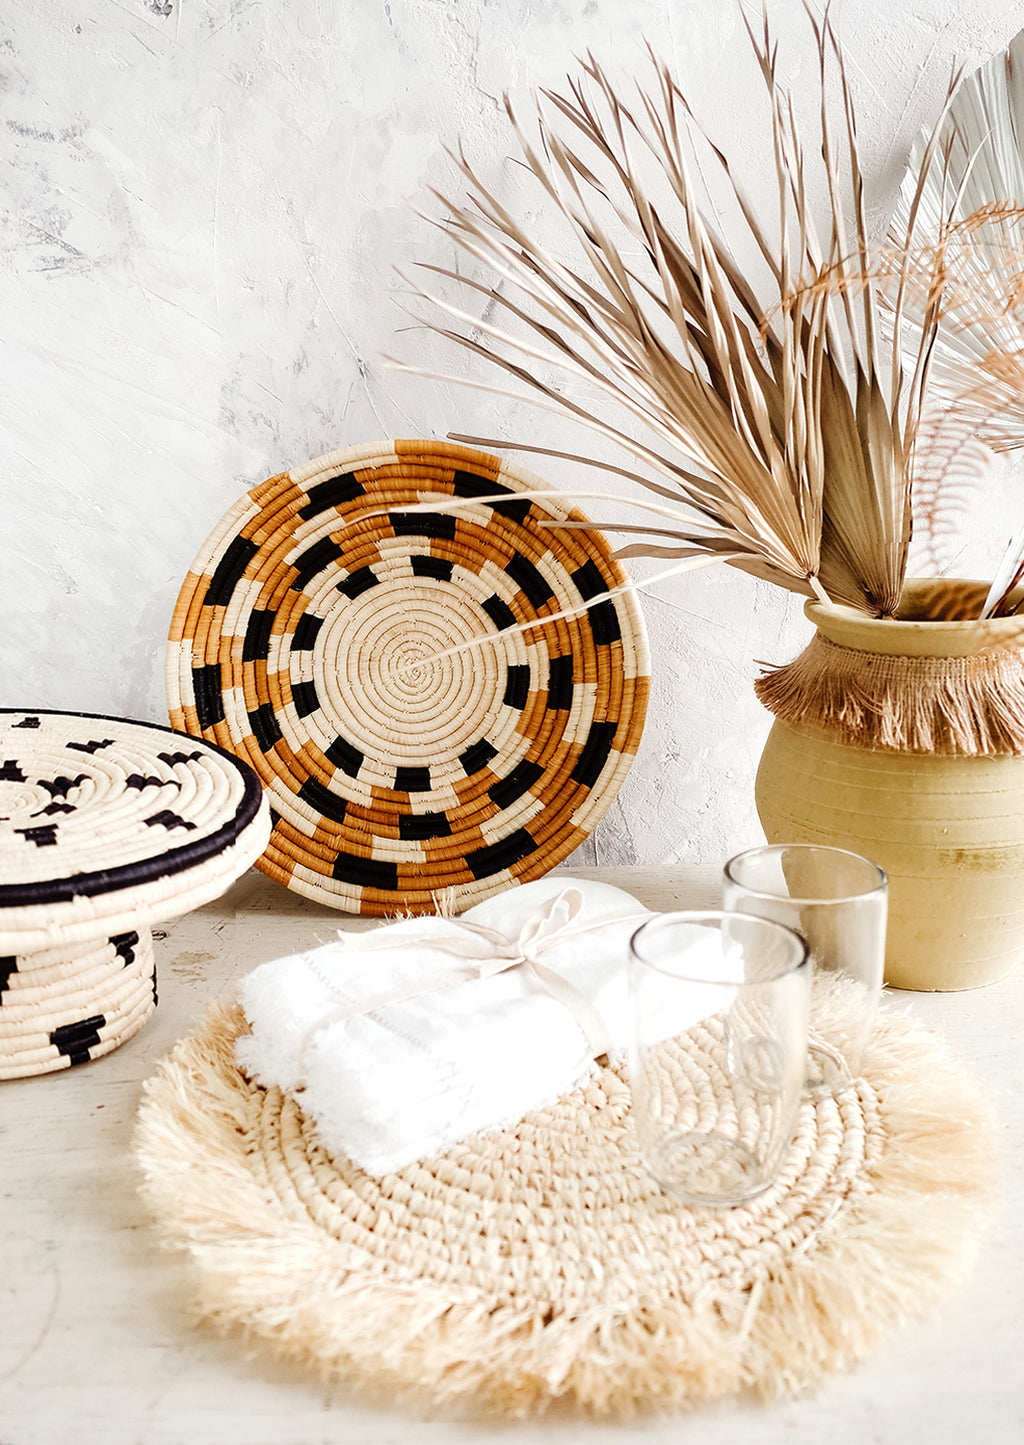 4: Variety of tabletop home decor in a neutral, earthy palette